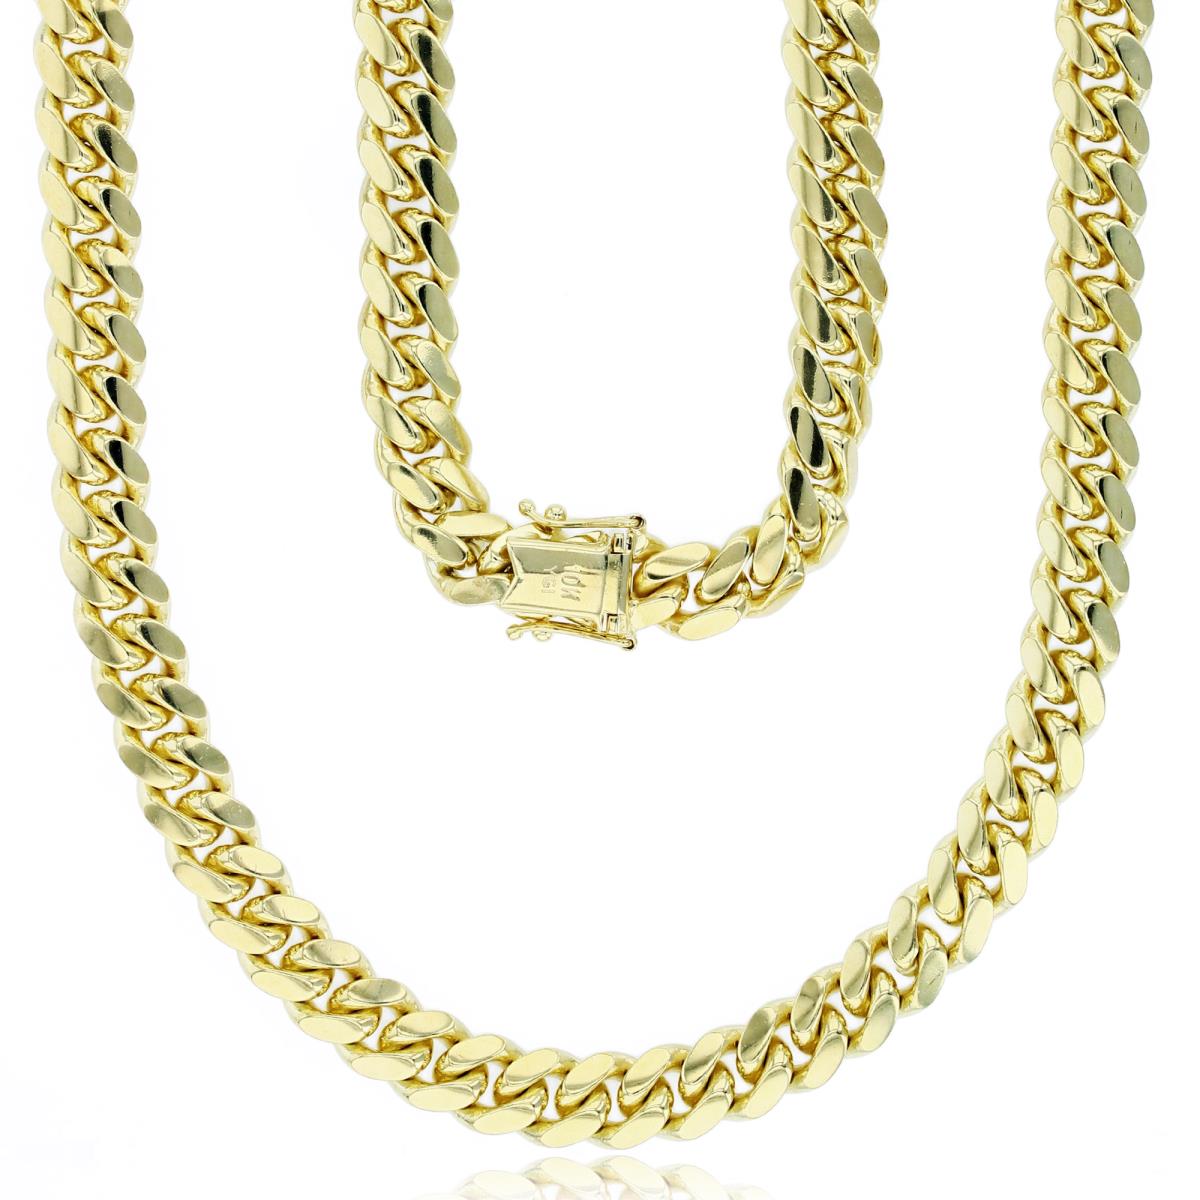 10K Yellow Gold 24" 250 Solid Miami Cuban Chain with Box Lock